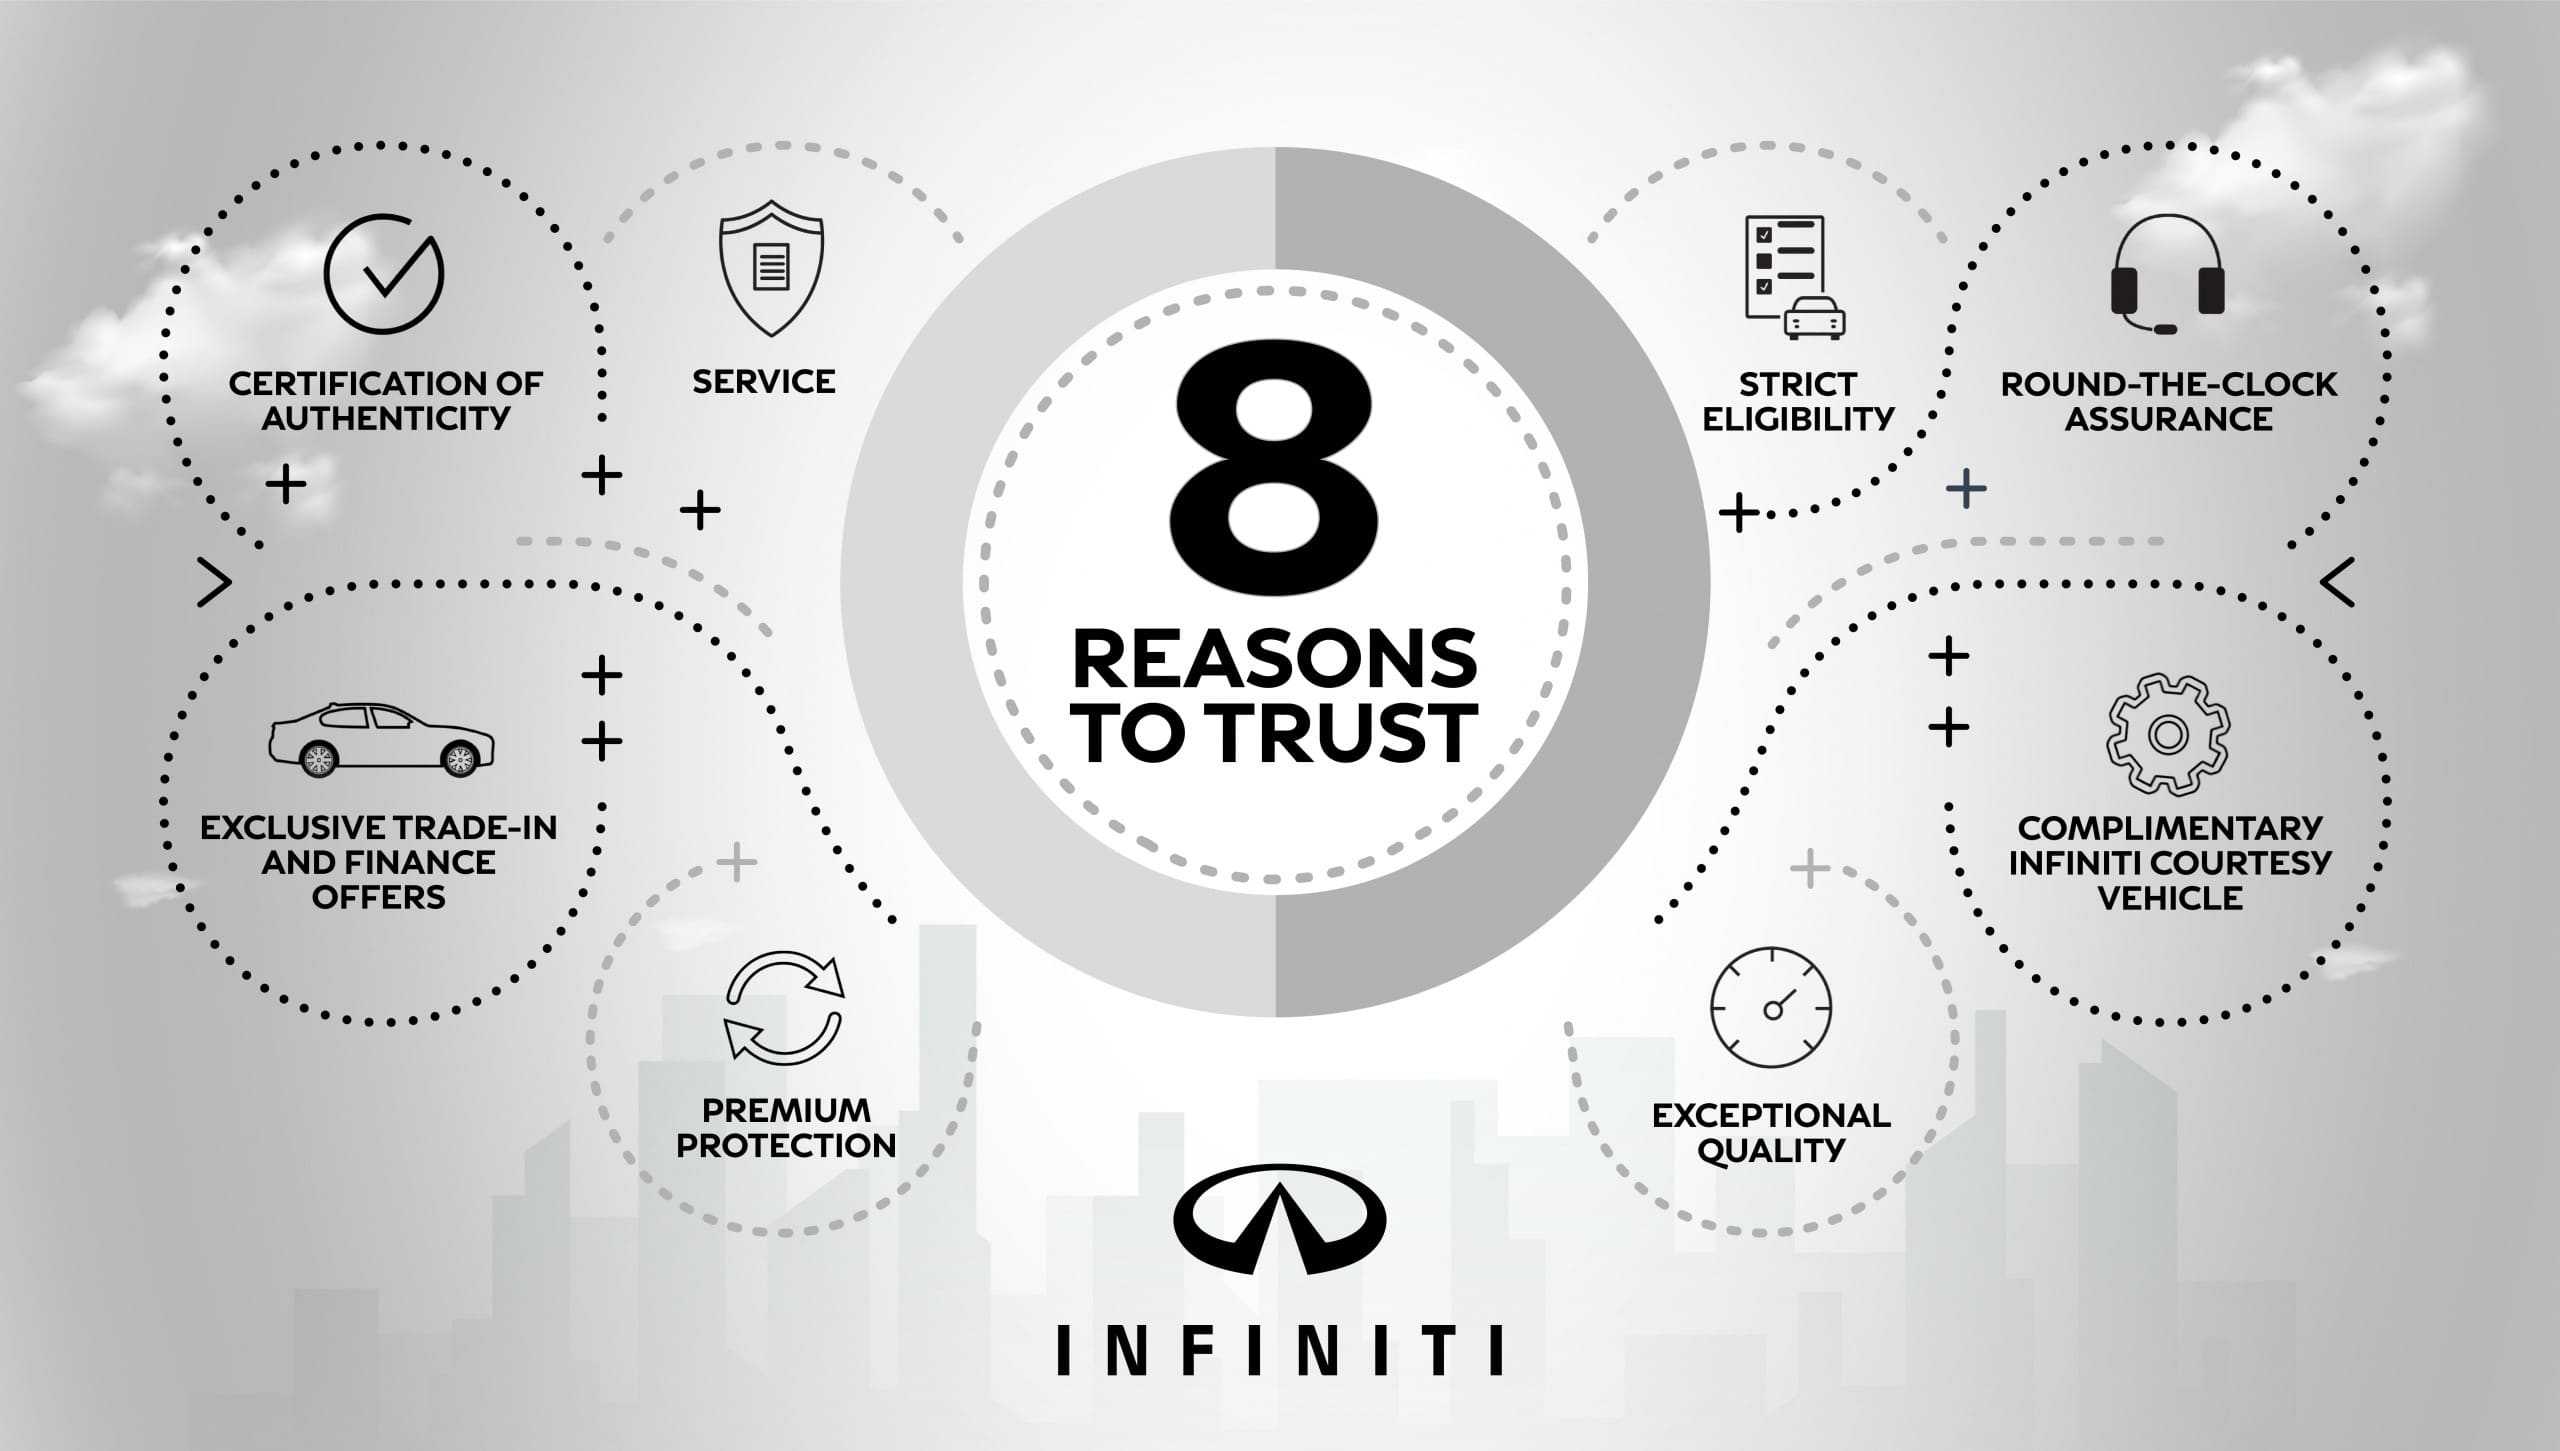 Infiniti commits to high-quality pre-owned cars